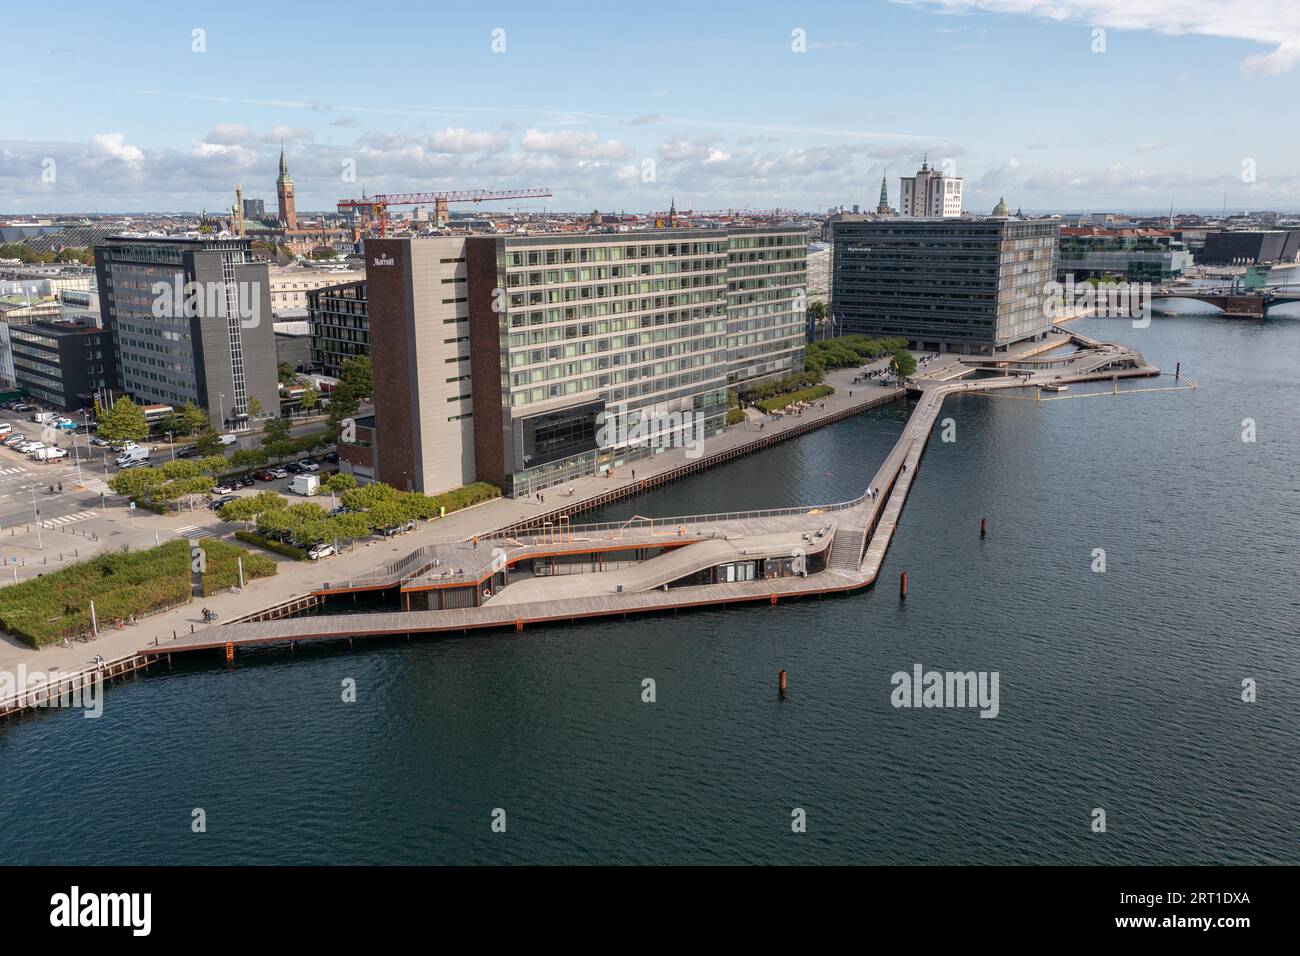 copenhagen-denmark-august-20-2021-aerial-drone-view-of-kalvebod-wave-a-wooden-promenade-at-the-harbour-waterfront-2RT1DXA.jpg